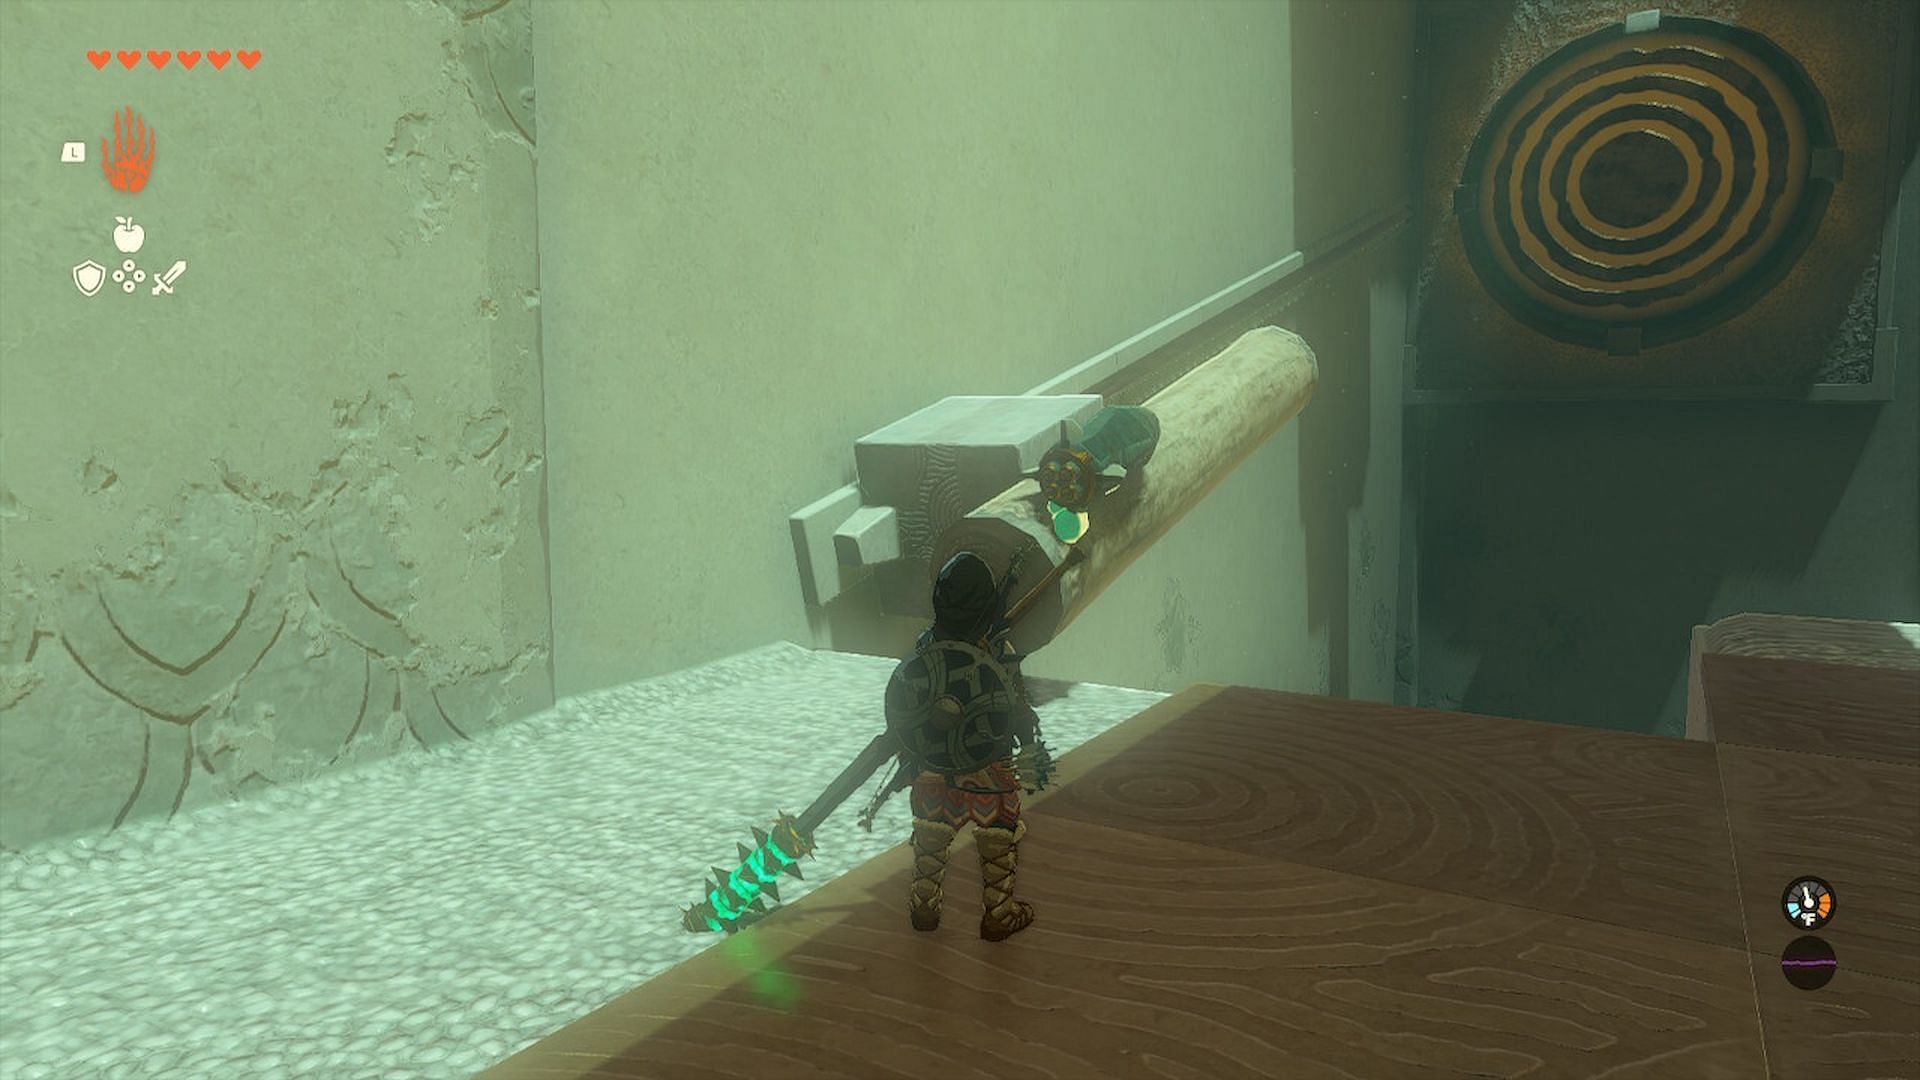 You must place the log in this manner to hit the target (Image via Nintendo)